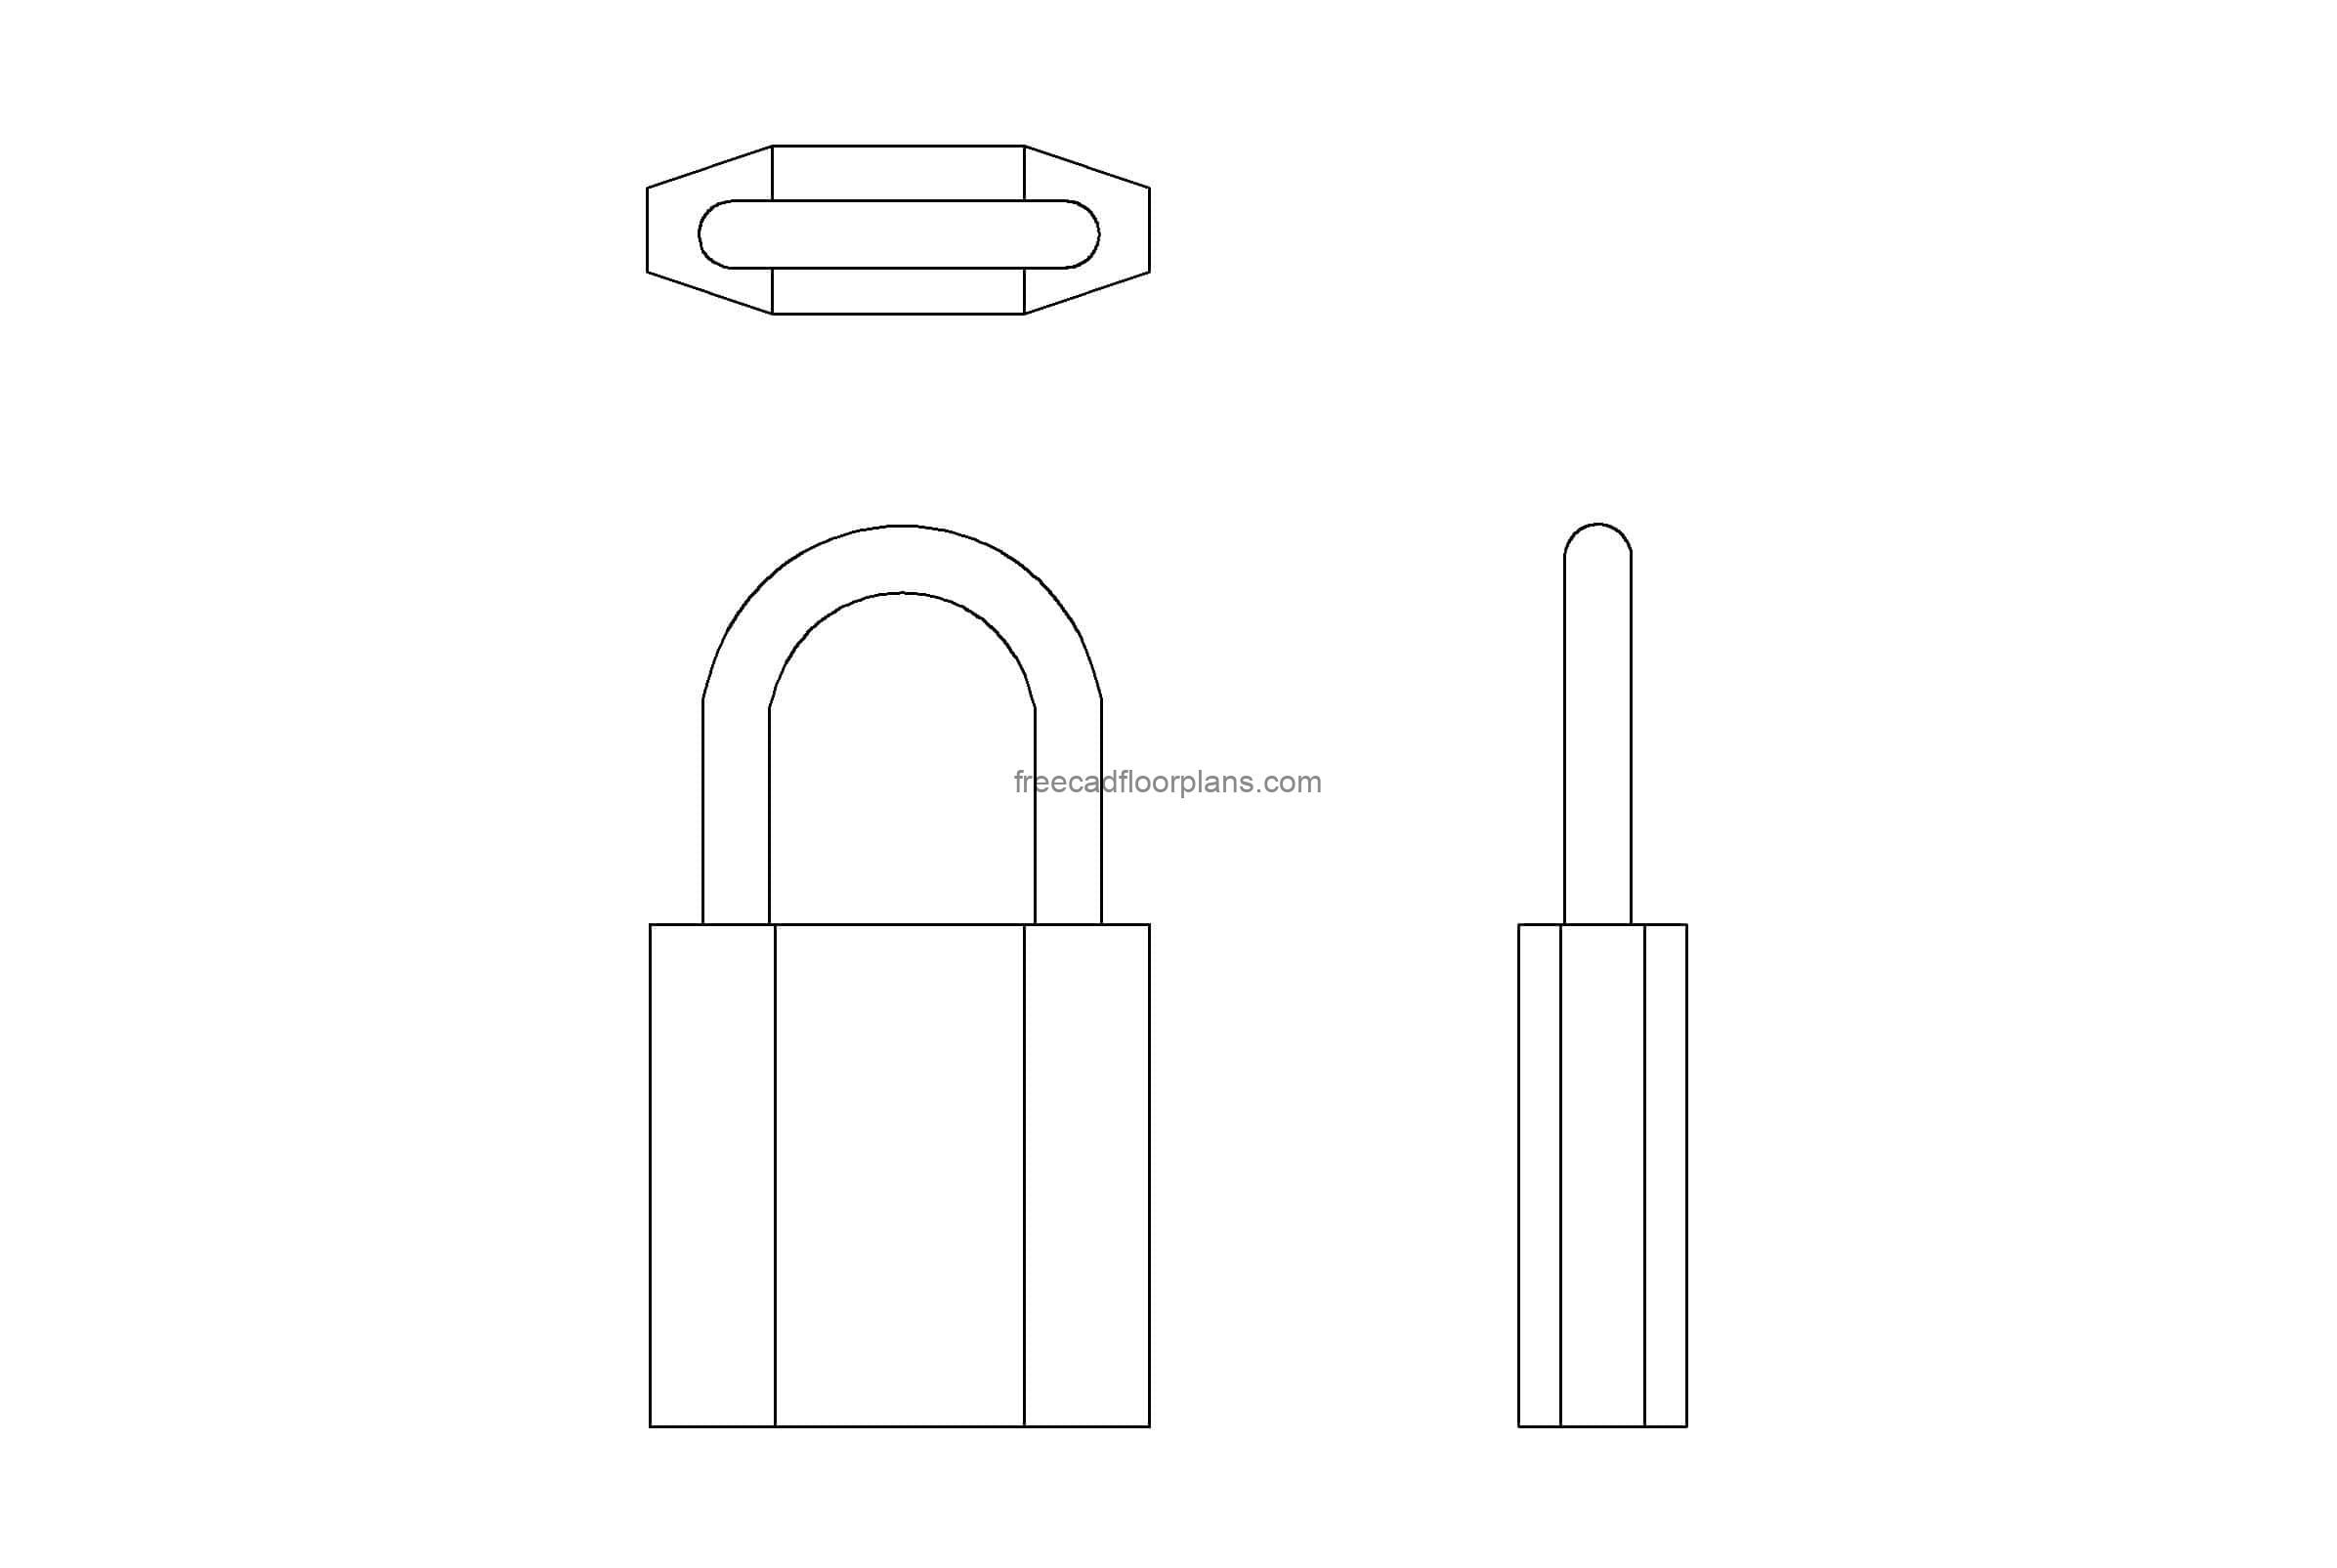 autocad drawing with all 2d views of a padlock, plan and elevation 2d views, dwg file for free download